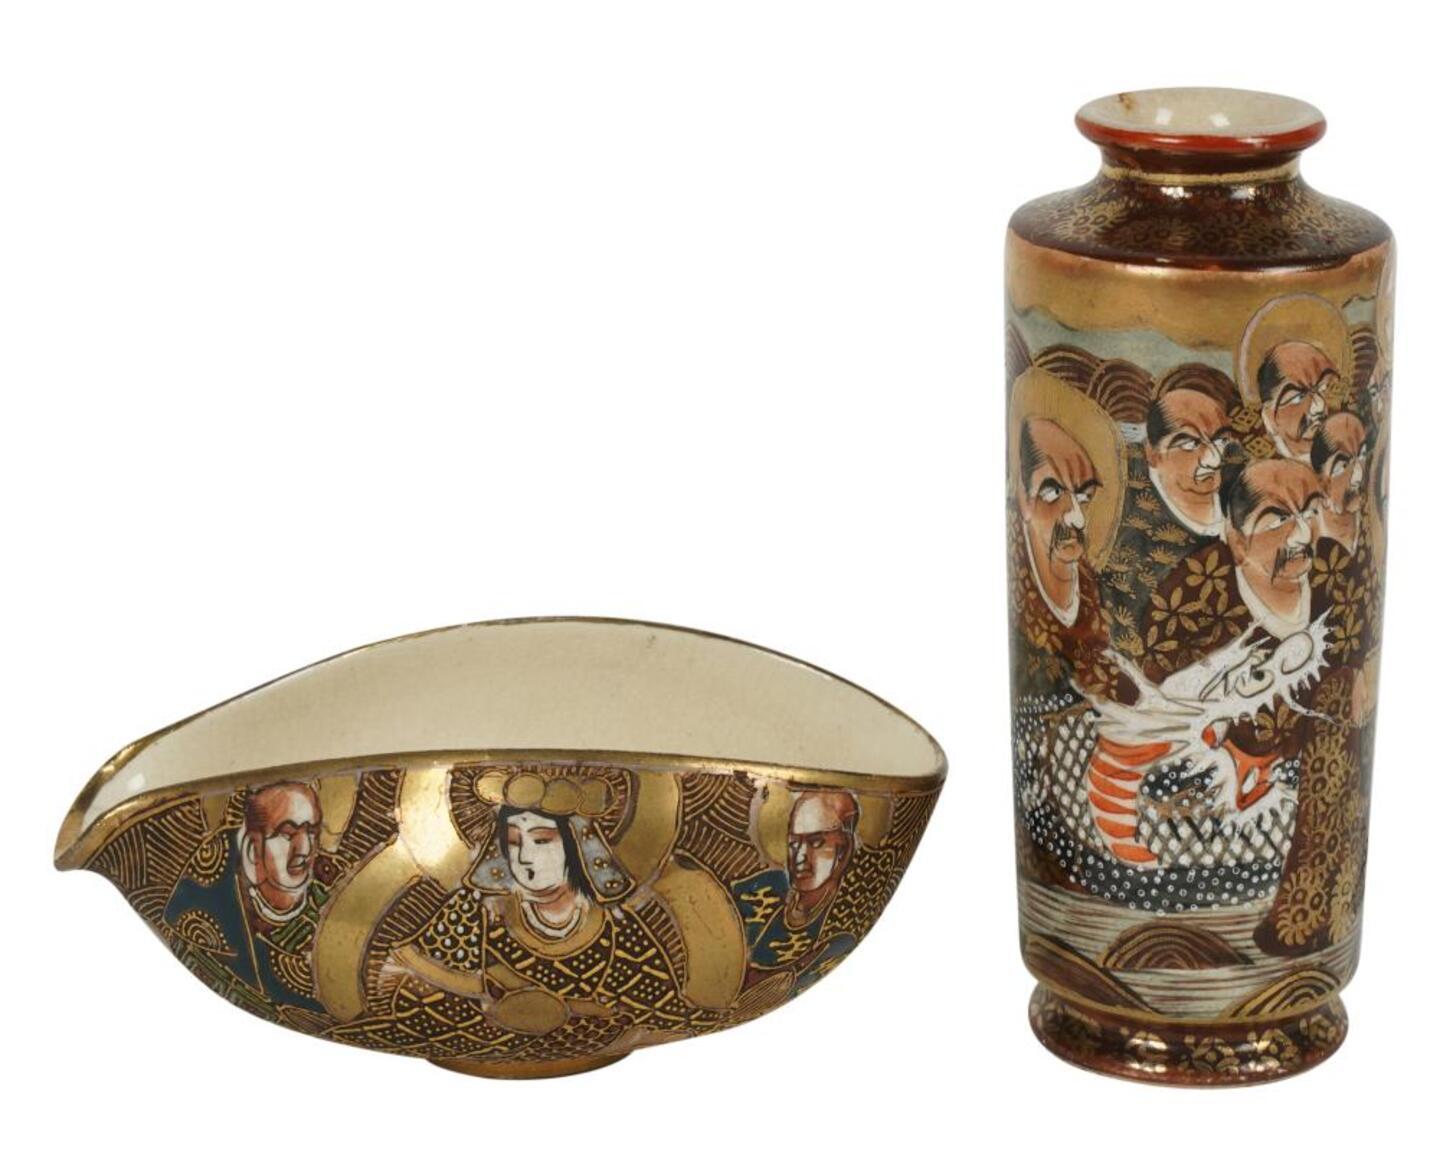 There are two Satsuma Canton Vases with cartouches and rouleau shapes, each featuring one panel of figures. Additionally, there is a uniquely shaped Satsuma bowl.

Vase: 5 x 2 in. (12.7 x 5.1 cm.)
Bowl: 2 x 4 1/2 x 3 in. (5.1 x 11.4 x 7.6 cm.)

Good